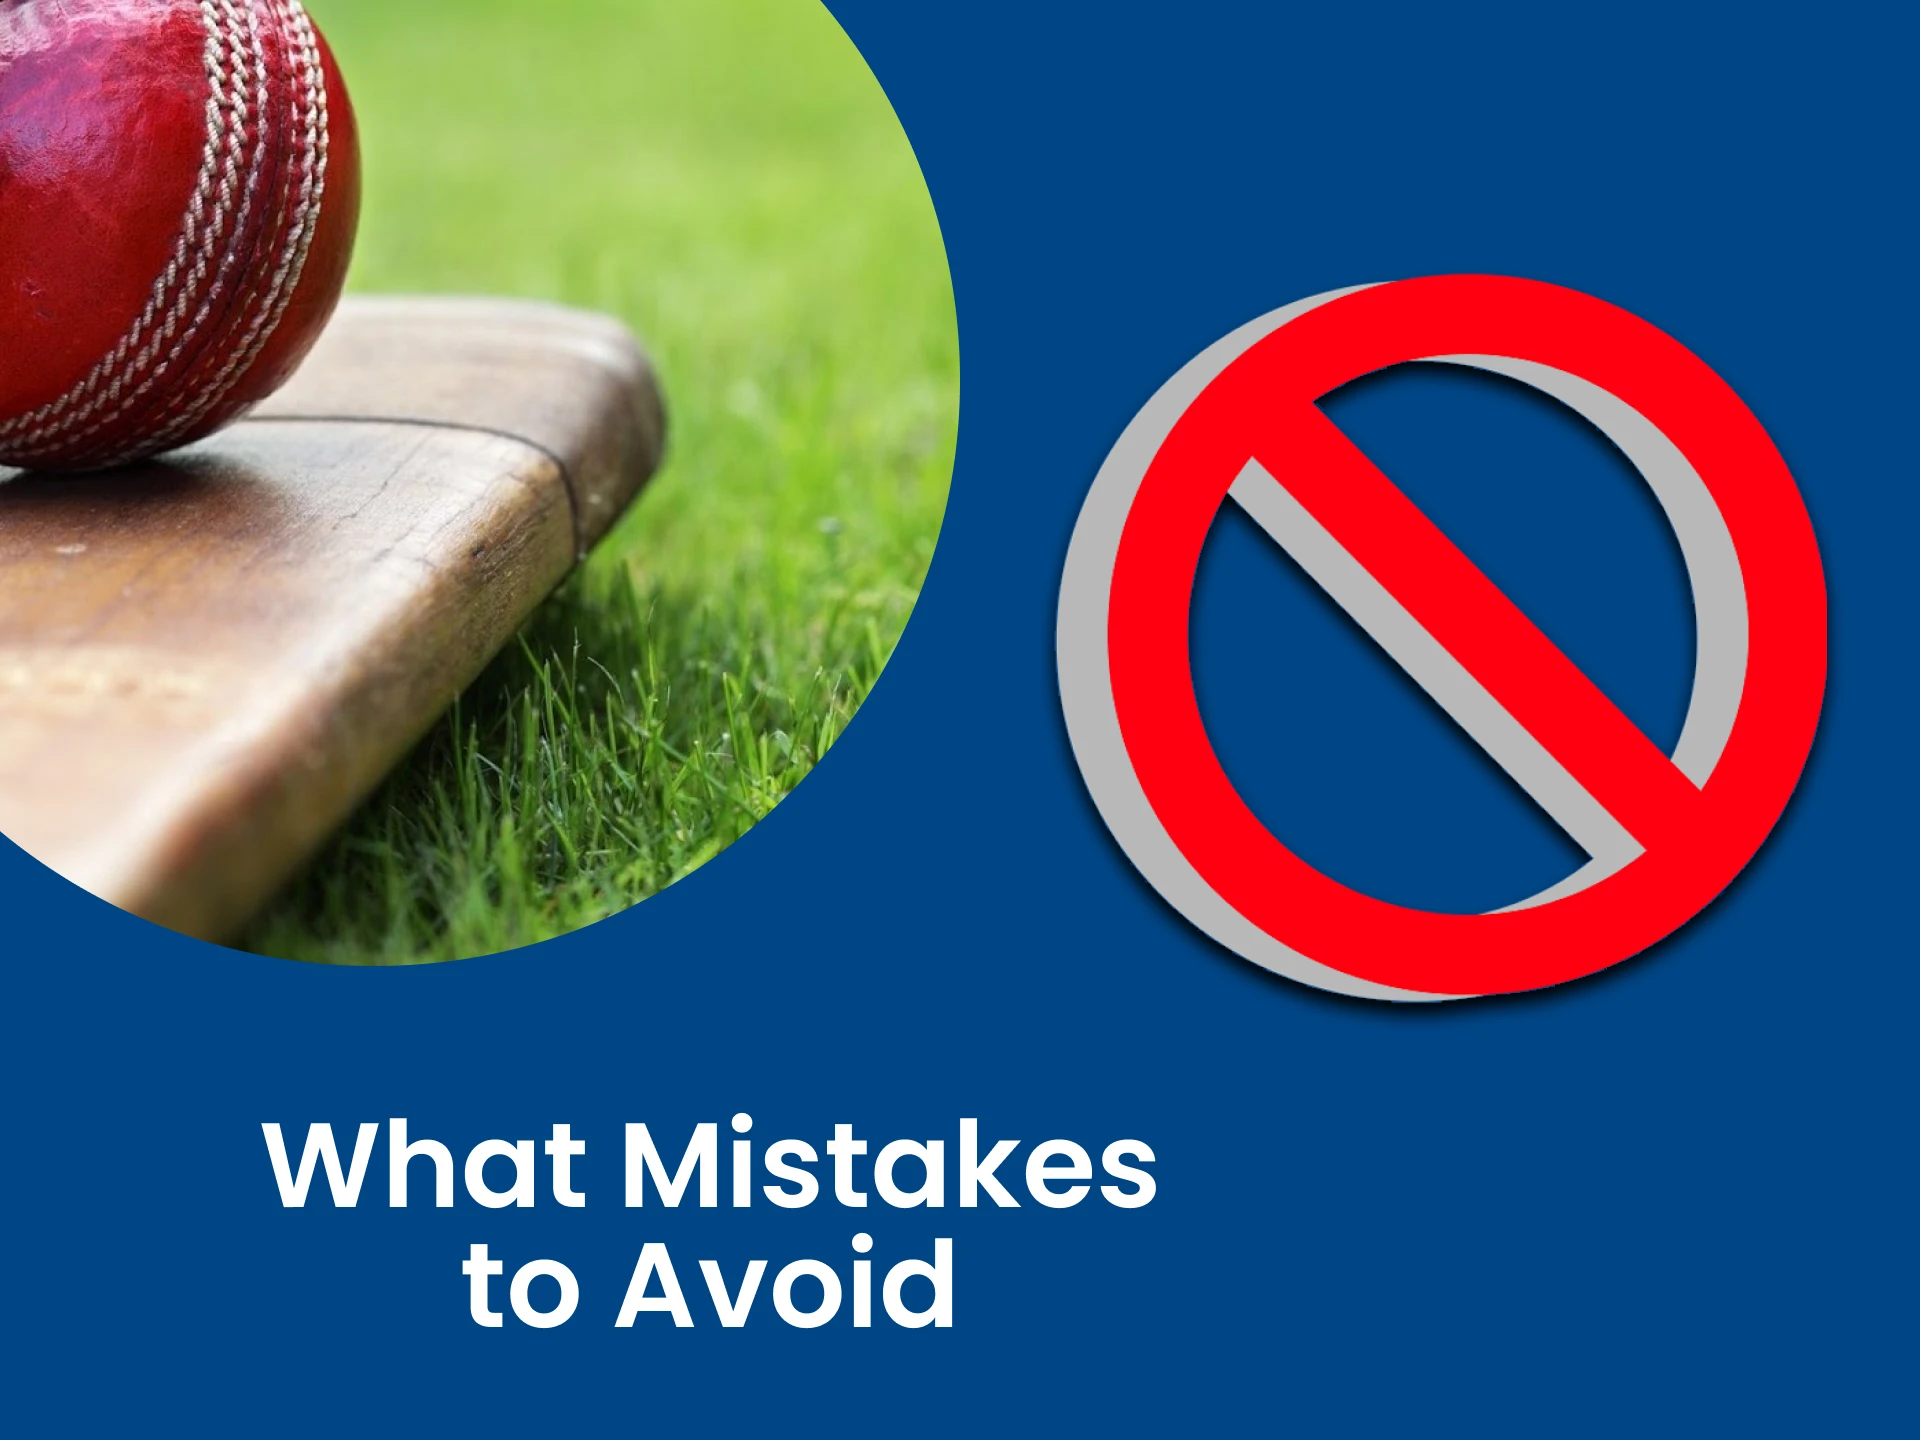 We will tell you how to avoid making mistakes in sports betting.